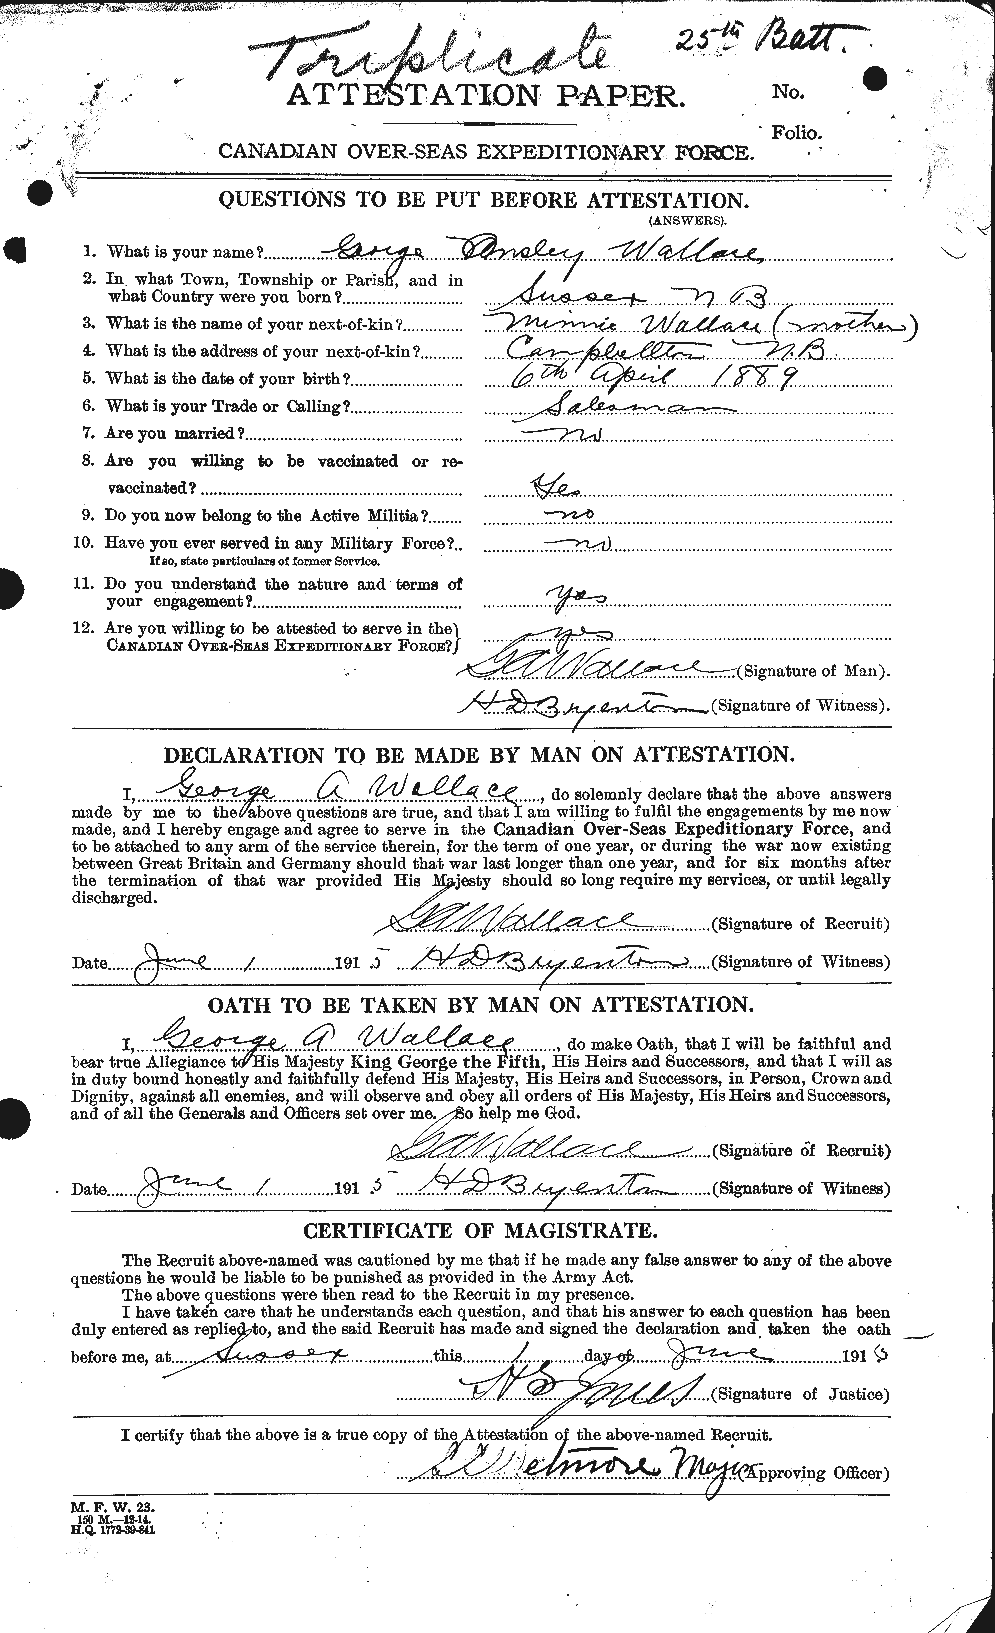 Personnel Records of the First World War - CEF 654451a